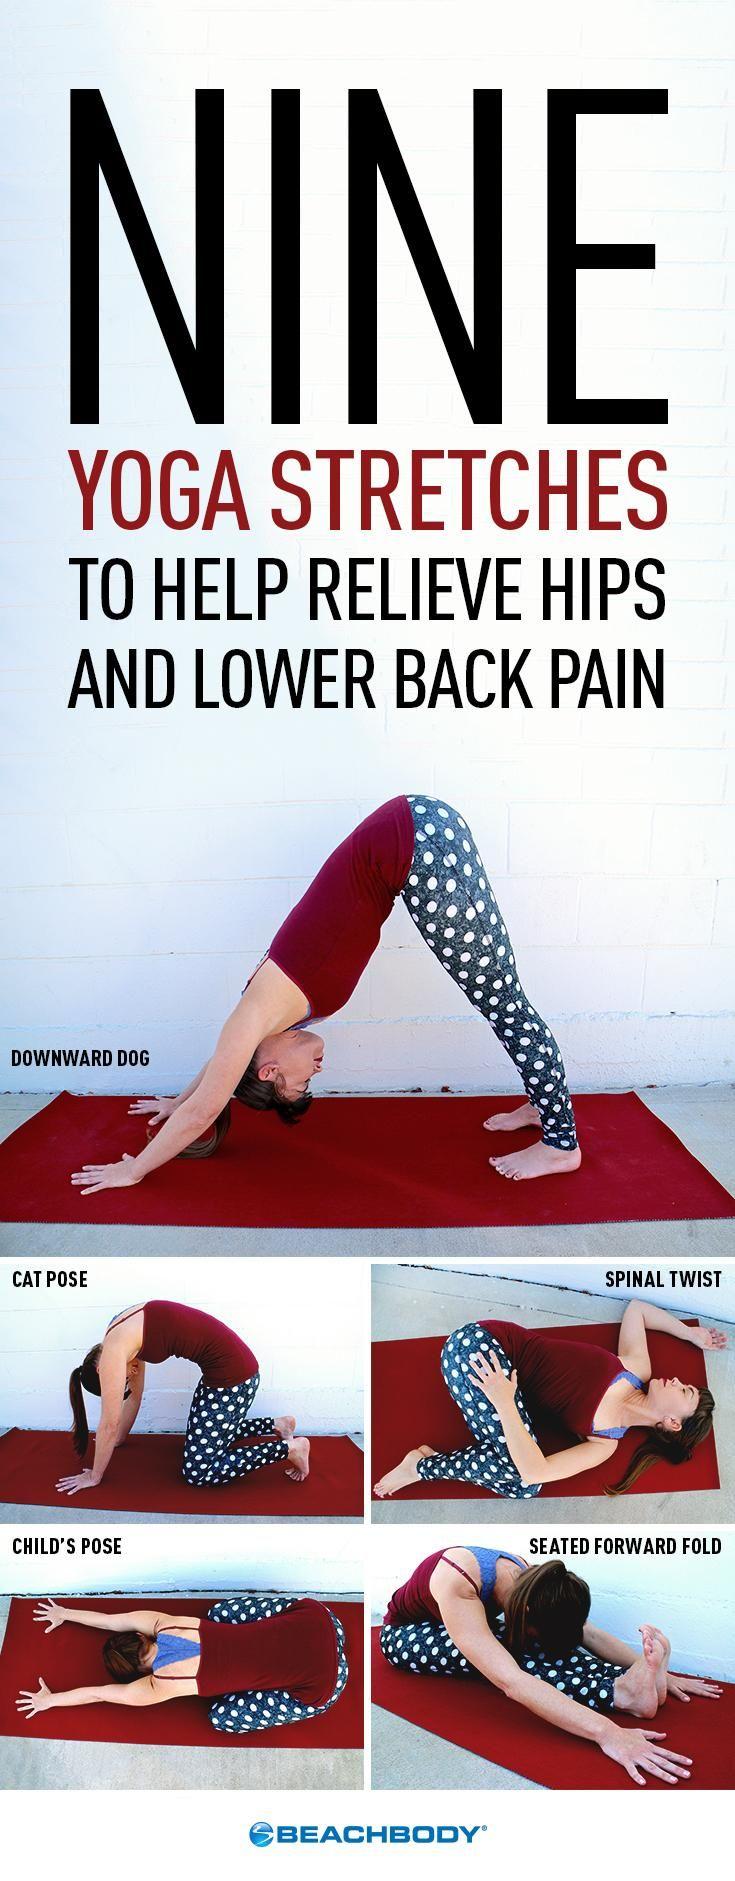 Hochzeit - 9 More Yoga Stretches To Help Relieve Hip And Lower Back Pain